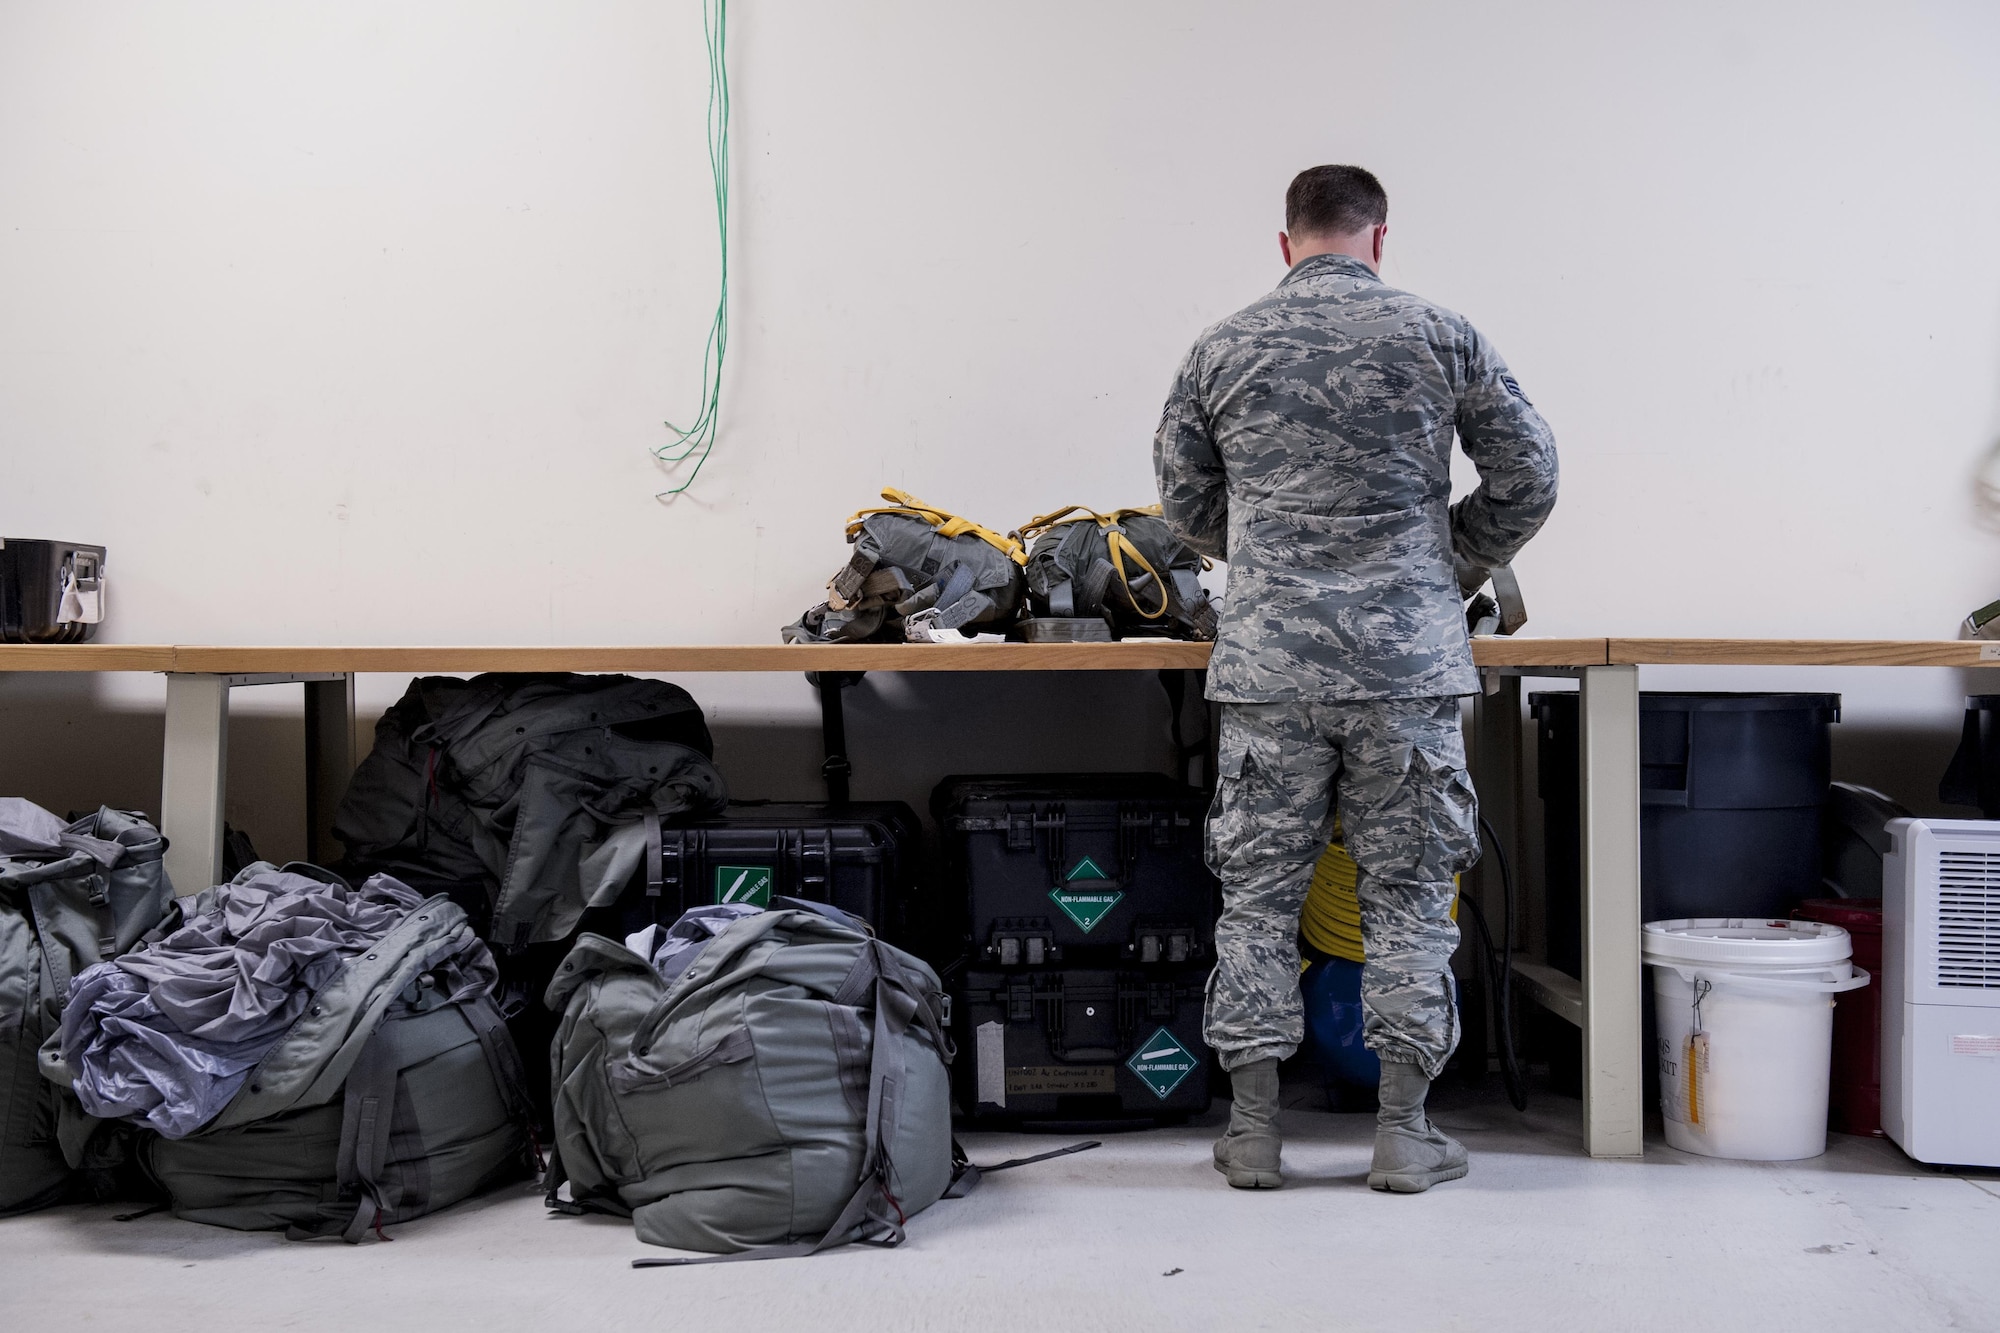 U.S. Air Force Senior Airman Erik Merrill, 31st Rescue Squadron aircrew flight equipment journeyman, inspects equipment June 20, 2016, at Kadena Air Base, Japan. Merrill assembles parachutes for pararescuemen and maintains a variety of aircrew equipment such as oxygen bottles, masks, life preservers, altimeters and night vision goggles. (U.S. Air Force photo by Senior Airman Peter Reft)